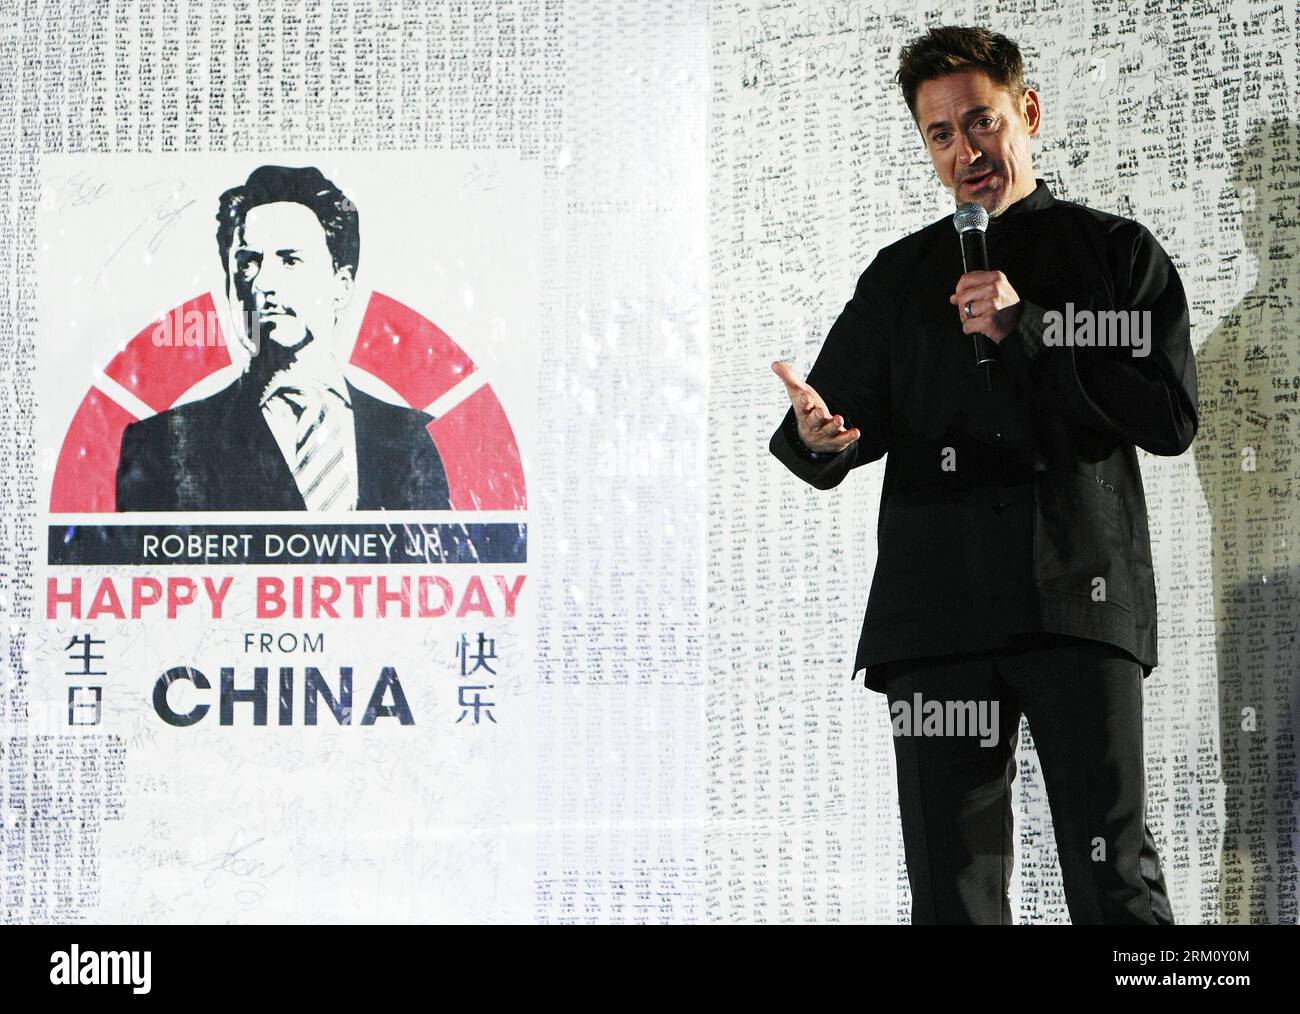 Bildnummer: 59481070  Datum: 06.04.2013  Copyright: imago/Xinhua BEIJING, April 6, 2013 -- Robert Downey Jr., leading actor of the Hollywood superhero movie Iron Man 3, shows his gratitude as he receives a birthday card from Chinese fans during a promotional event of the movie at the Imperial Ancestral Temple in Beijing, capital of China, April 6, 2013. The movie Iron Man 3 is planned to release on the Chinese mainland in May. (Xinhua) (lfj) CHINA-BEIJING- IRON MAN 3 -PROMOTION (CN) PUBLICATIONxNOTxINxCHN Entertainment people xas x0x 2013 quer premiumd     59481070 Date 06 04 2013 Copyright Im Stock Photo